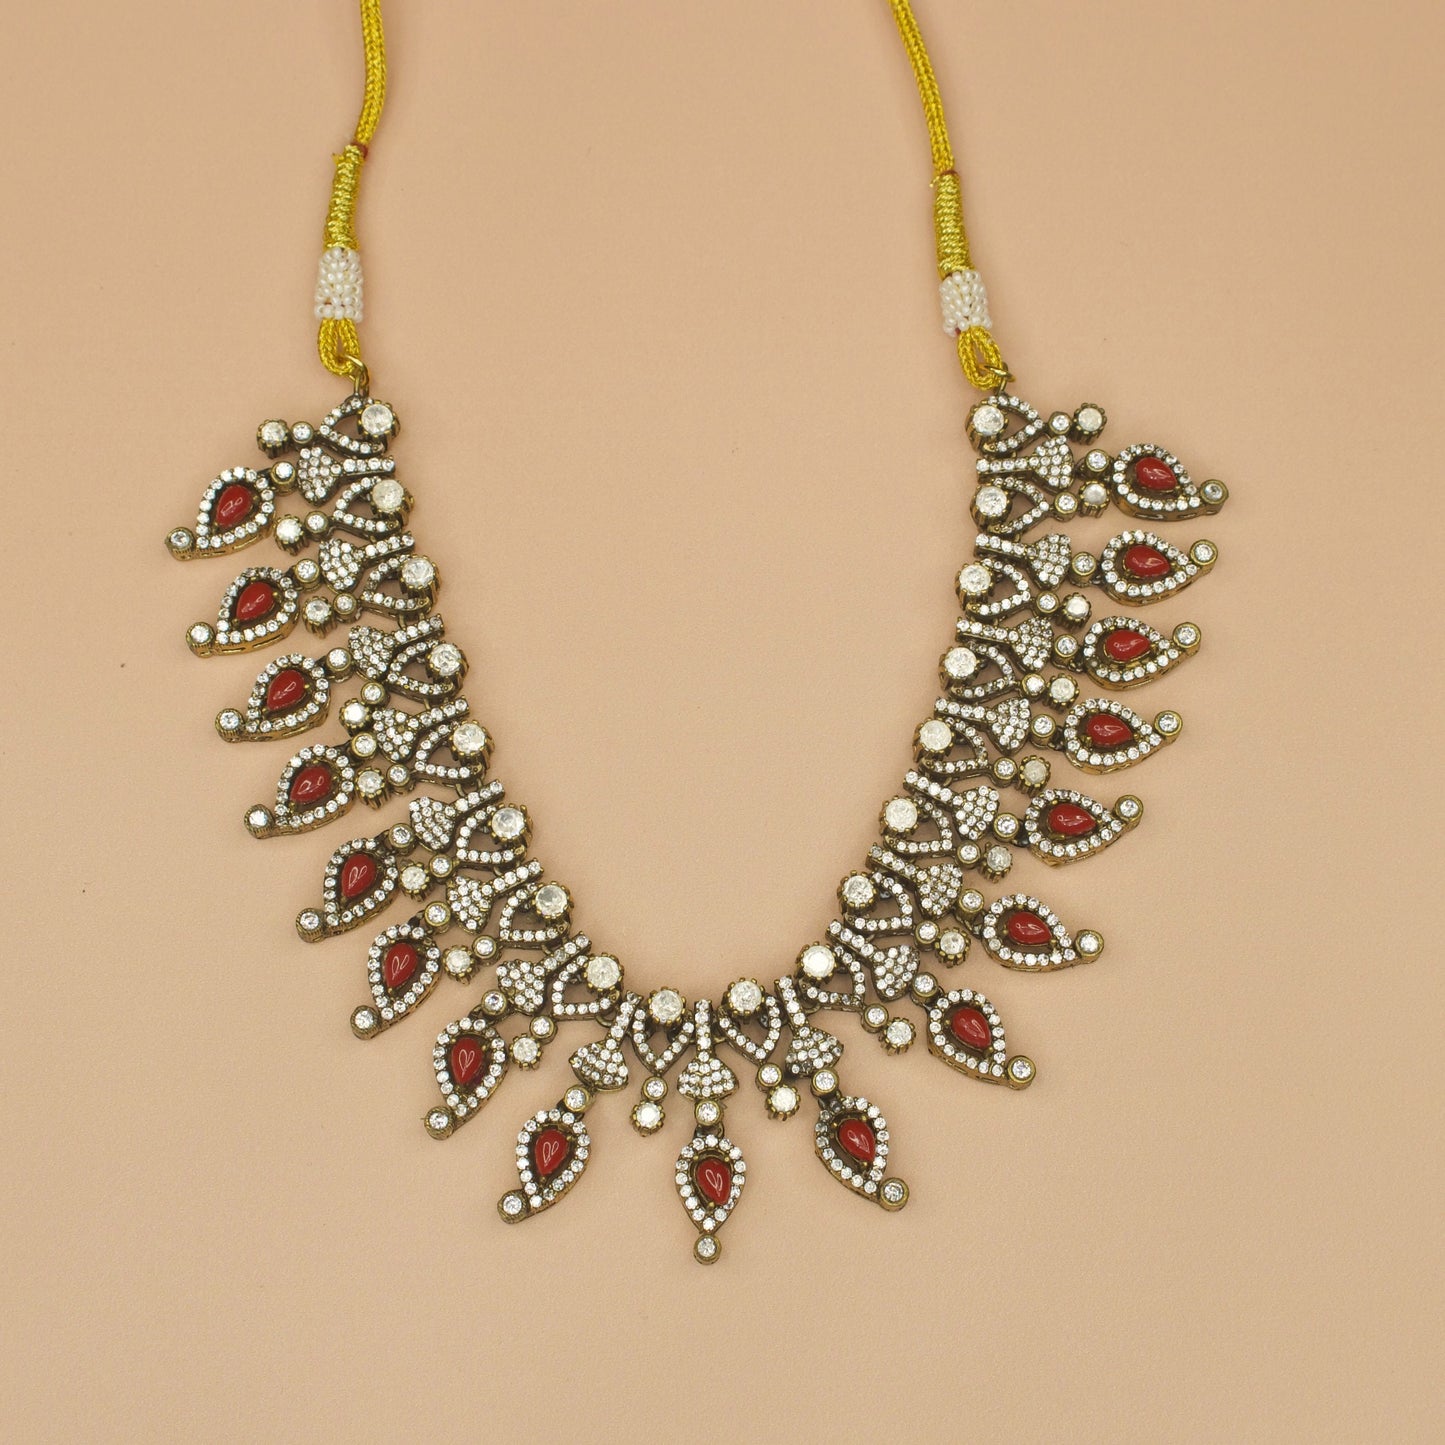 Harmony Victorian Necklace Set with mango motifs & earrings